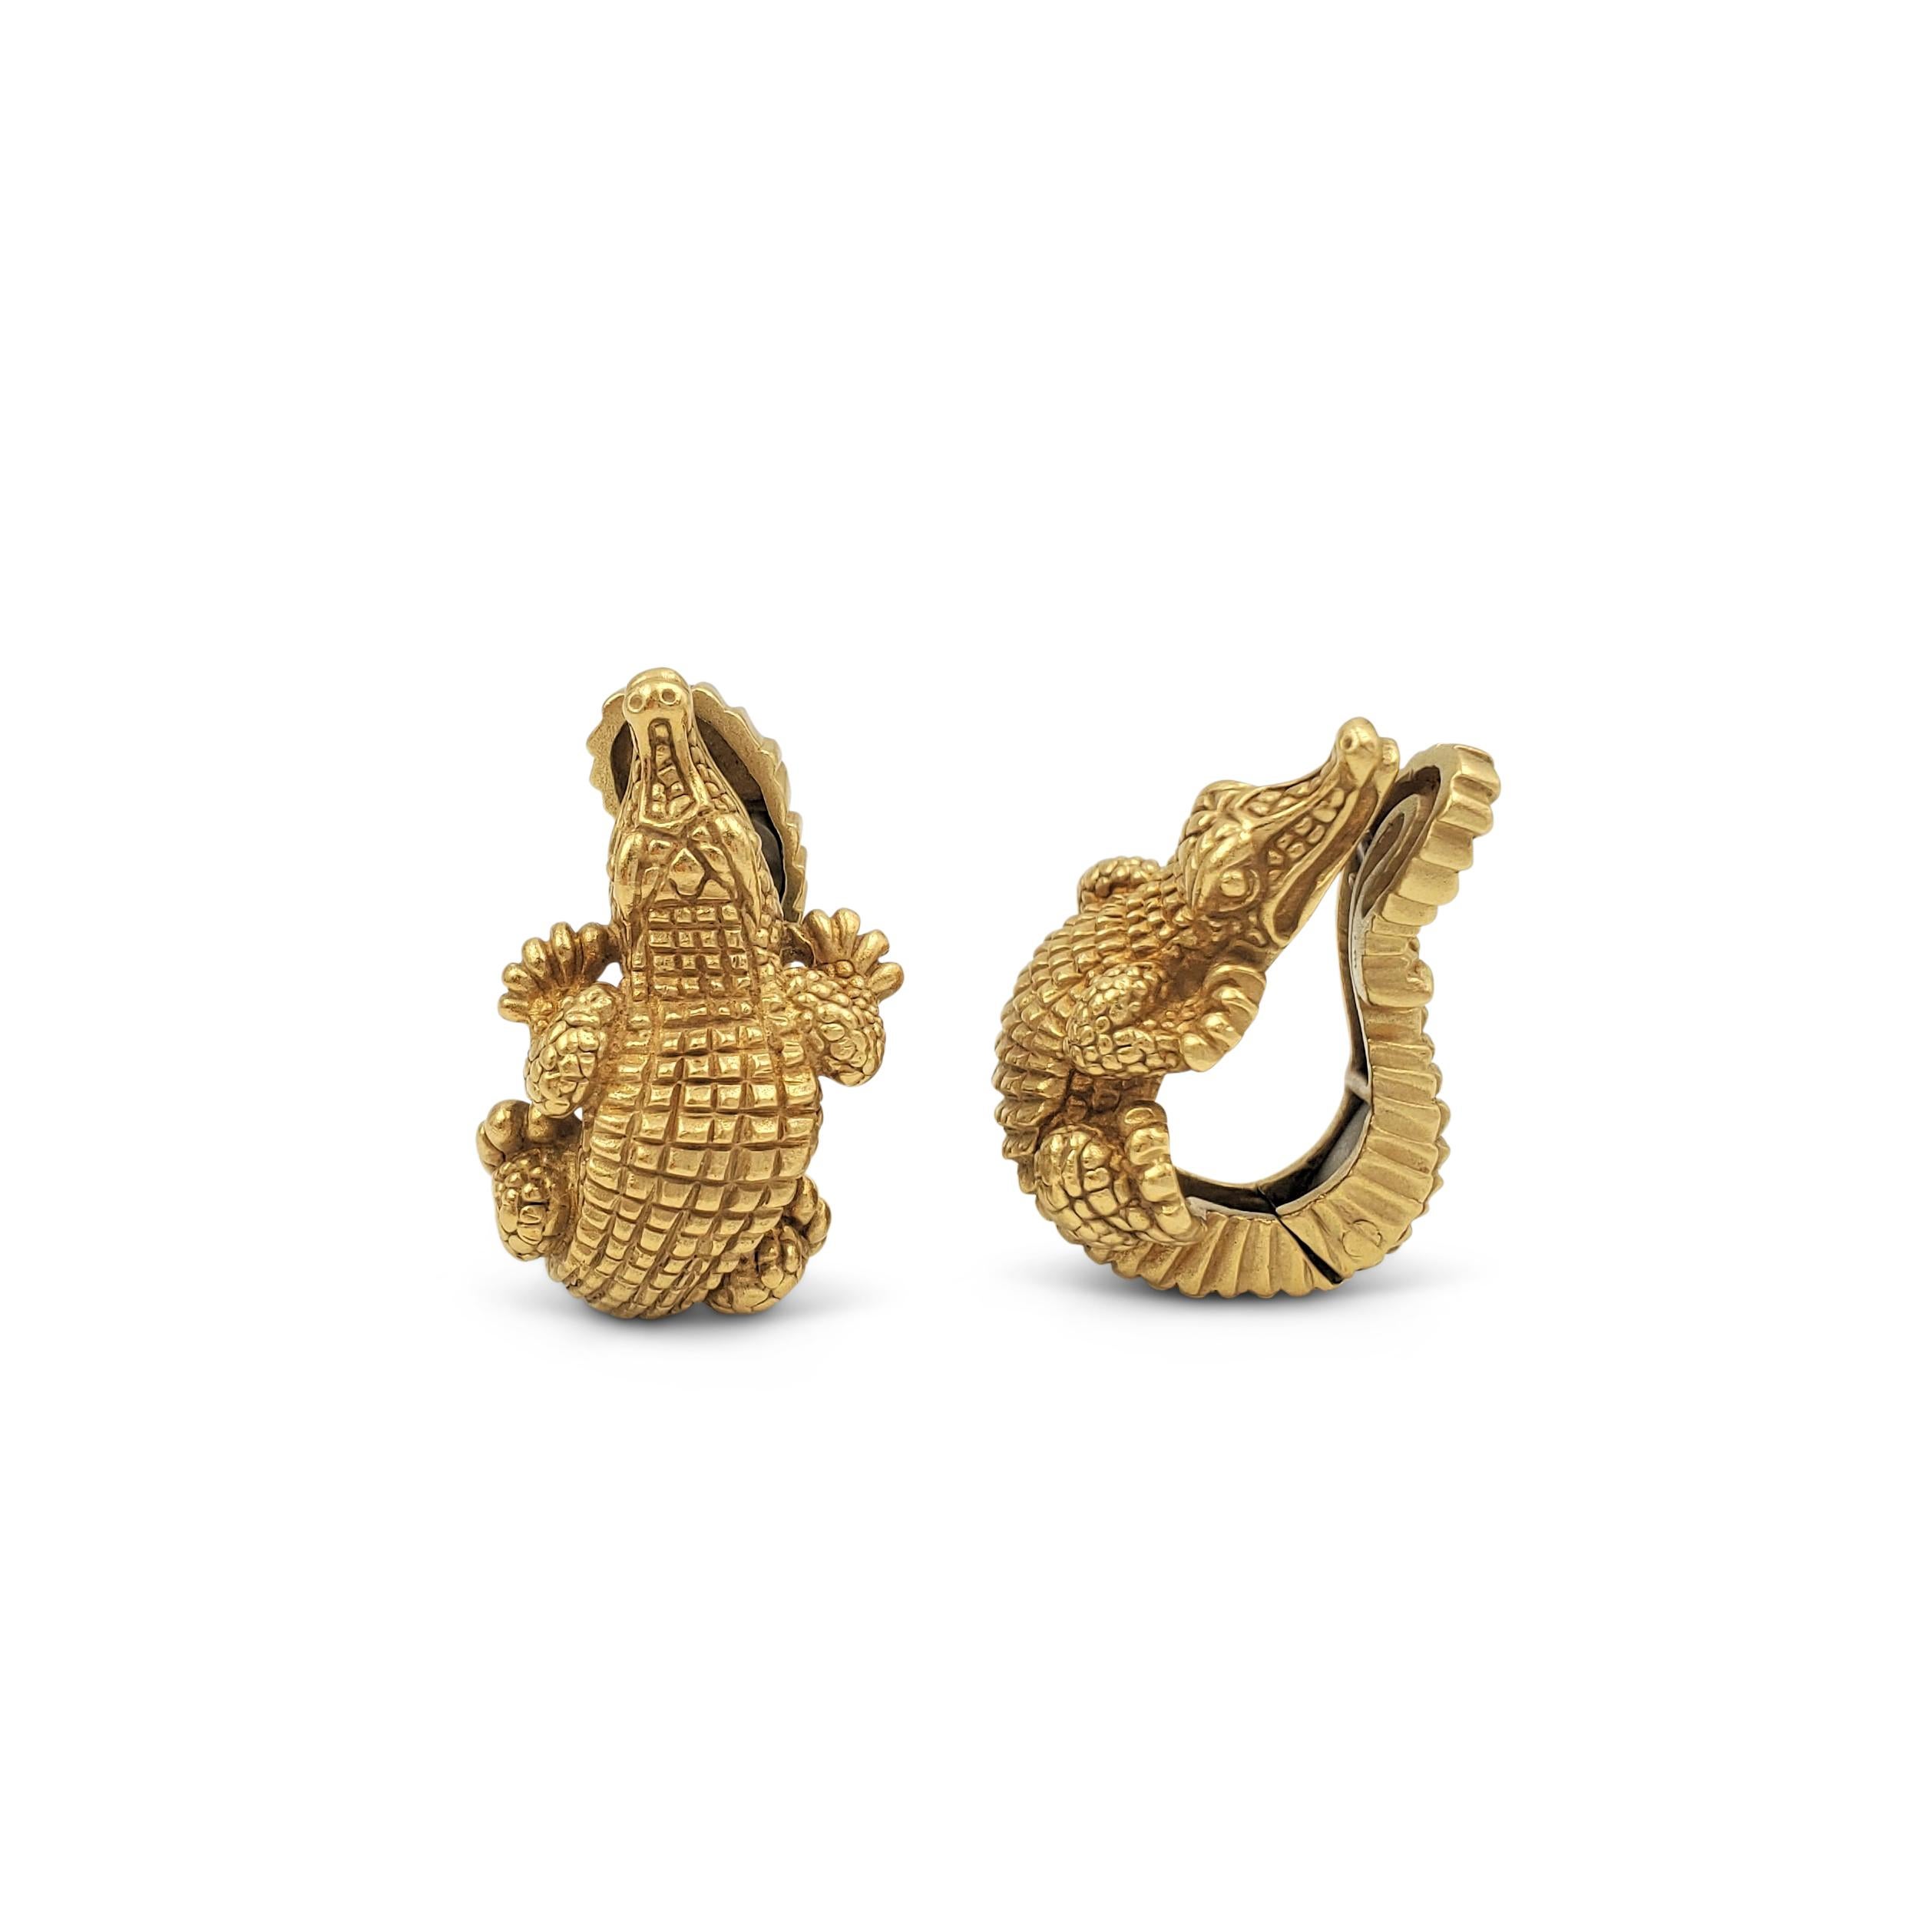 A pair of authentic and iconic vintage Barry Kieselstein-Cord alligator earrings crafted in matte 18 karat yellow gold. Signed Kieselstein-Cord, 1997, 750, with hallmarks. Clip backs without posts. The earrings are not presented with the original